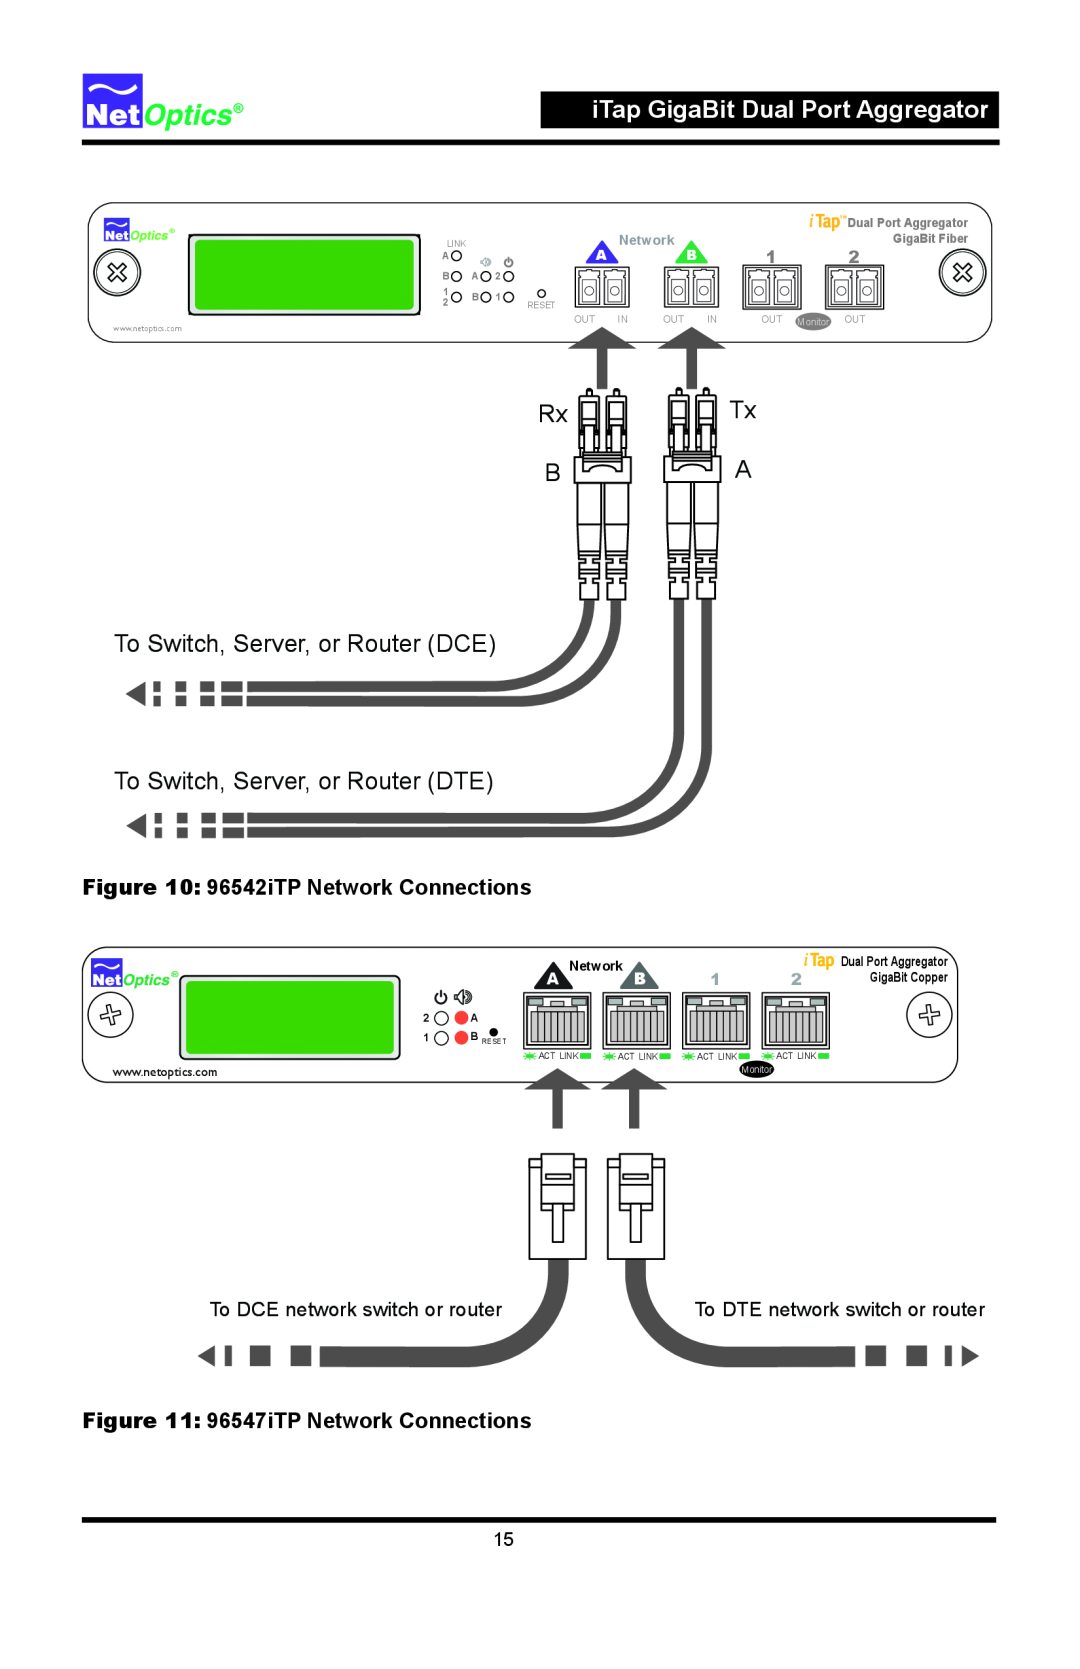 Net Optics 96547iTP Rx B To Switch, Server, or Router DCE, To Switch, Server, or Router DTE, Tx A, Network, GigaBit Fiber 